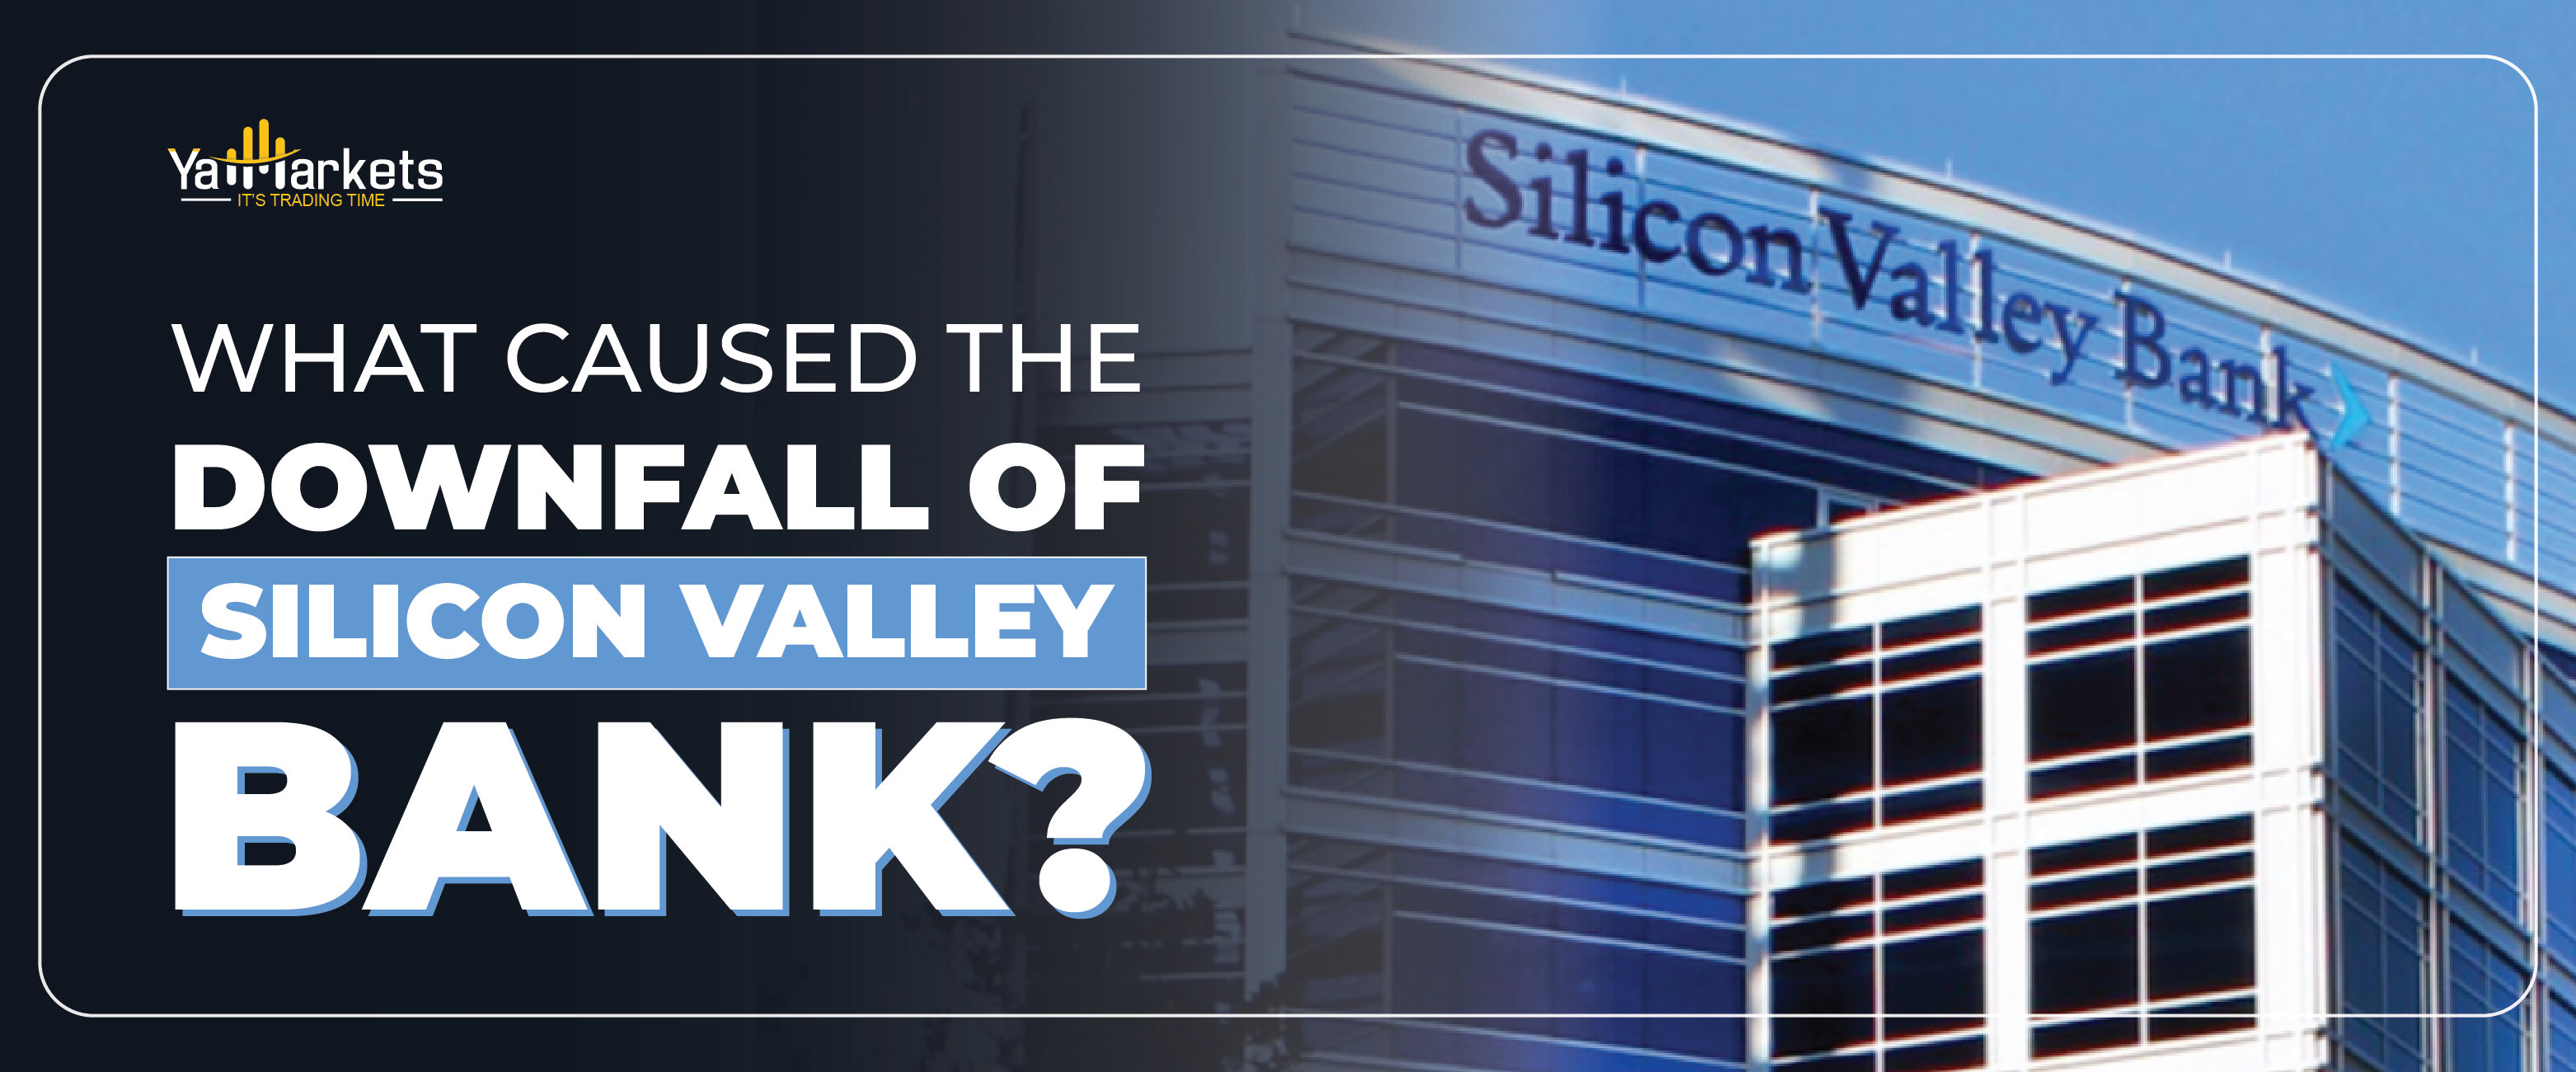 What caused the downfall of Silicon Valley Bank?